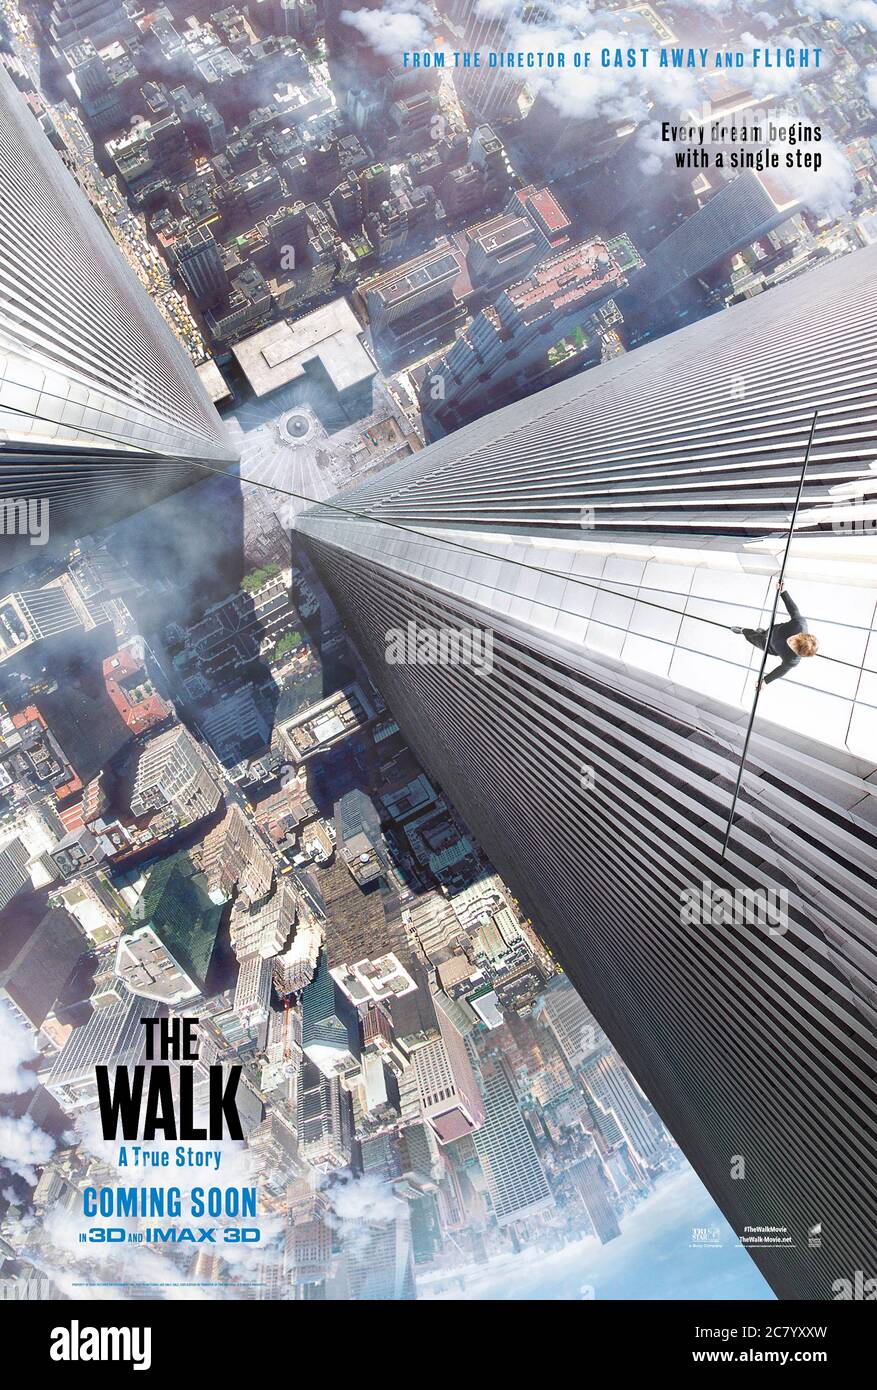 The Walk (2015) directed by Robert Zemeckis and starring Joseph Gordon-Levitt, Charlotte Le Bon and Guillaume Baillargeon. Documentary about Philippe Petit 1974 tightrope walk between the twin towers of the World Trade Center in New York City. Stock Photo